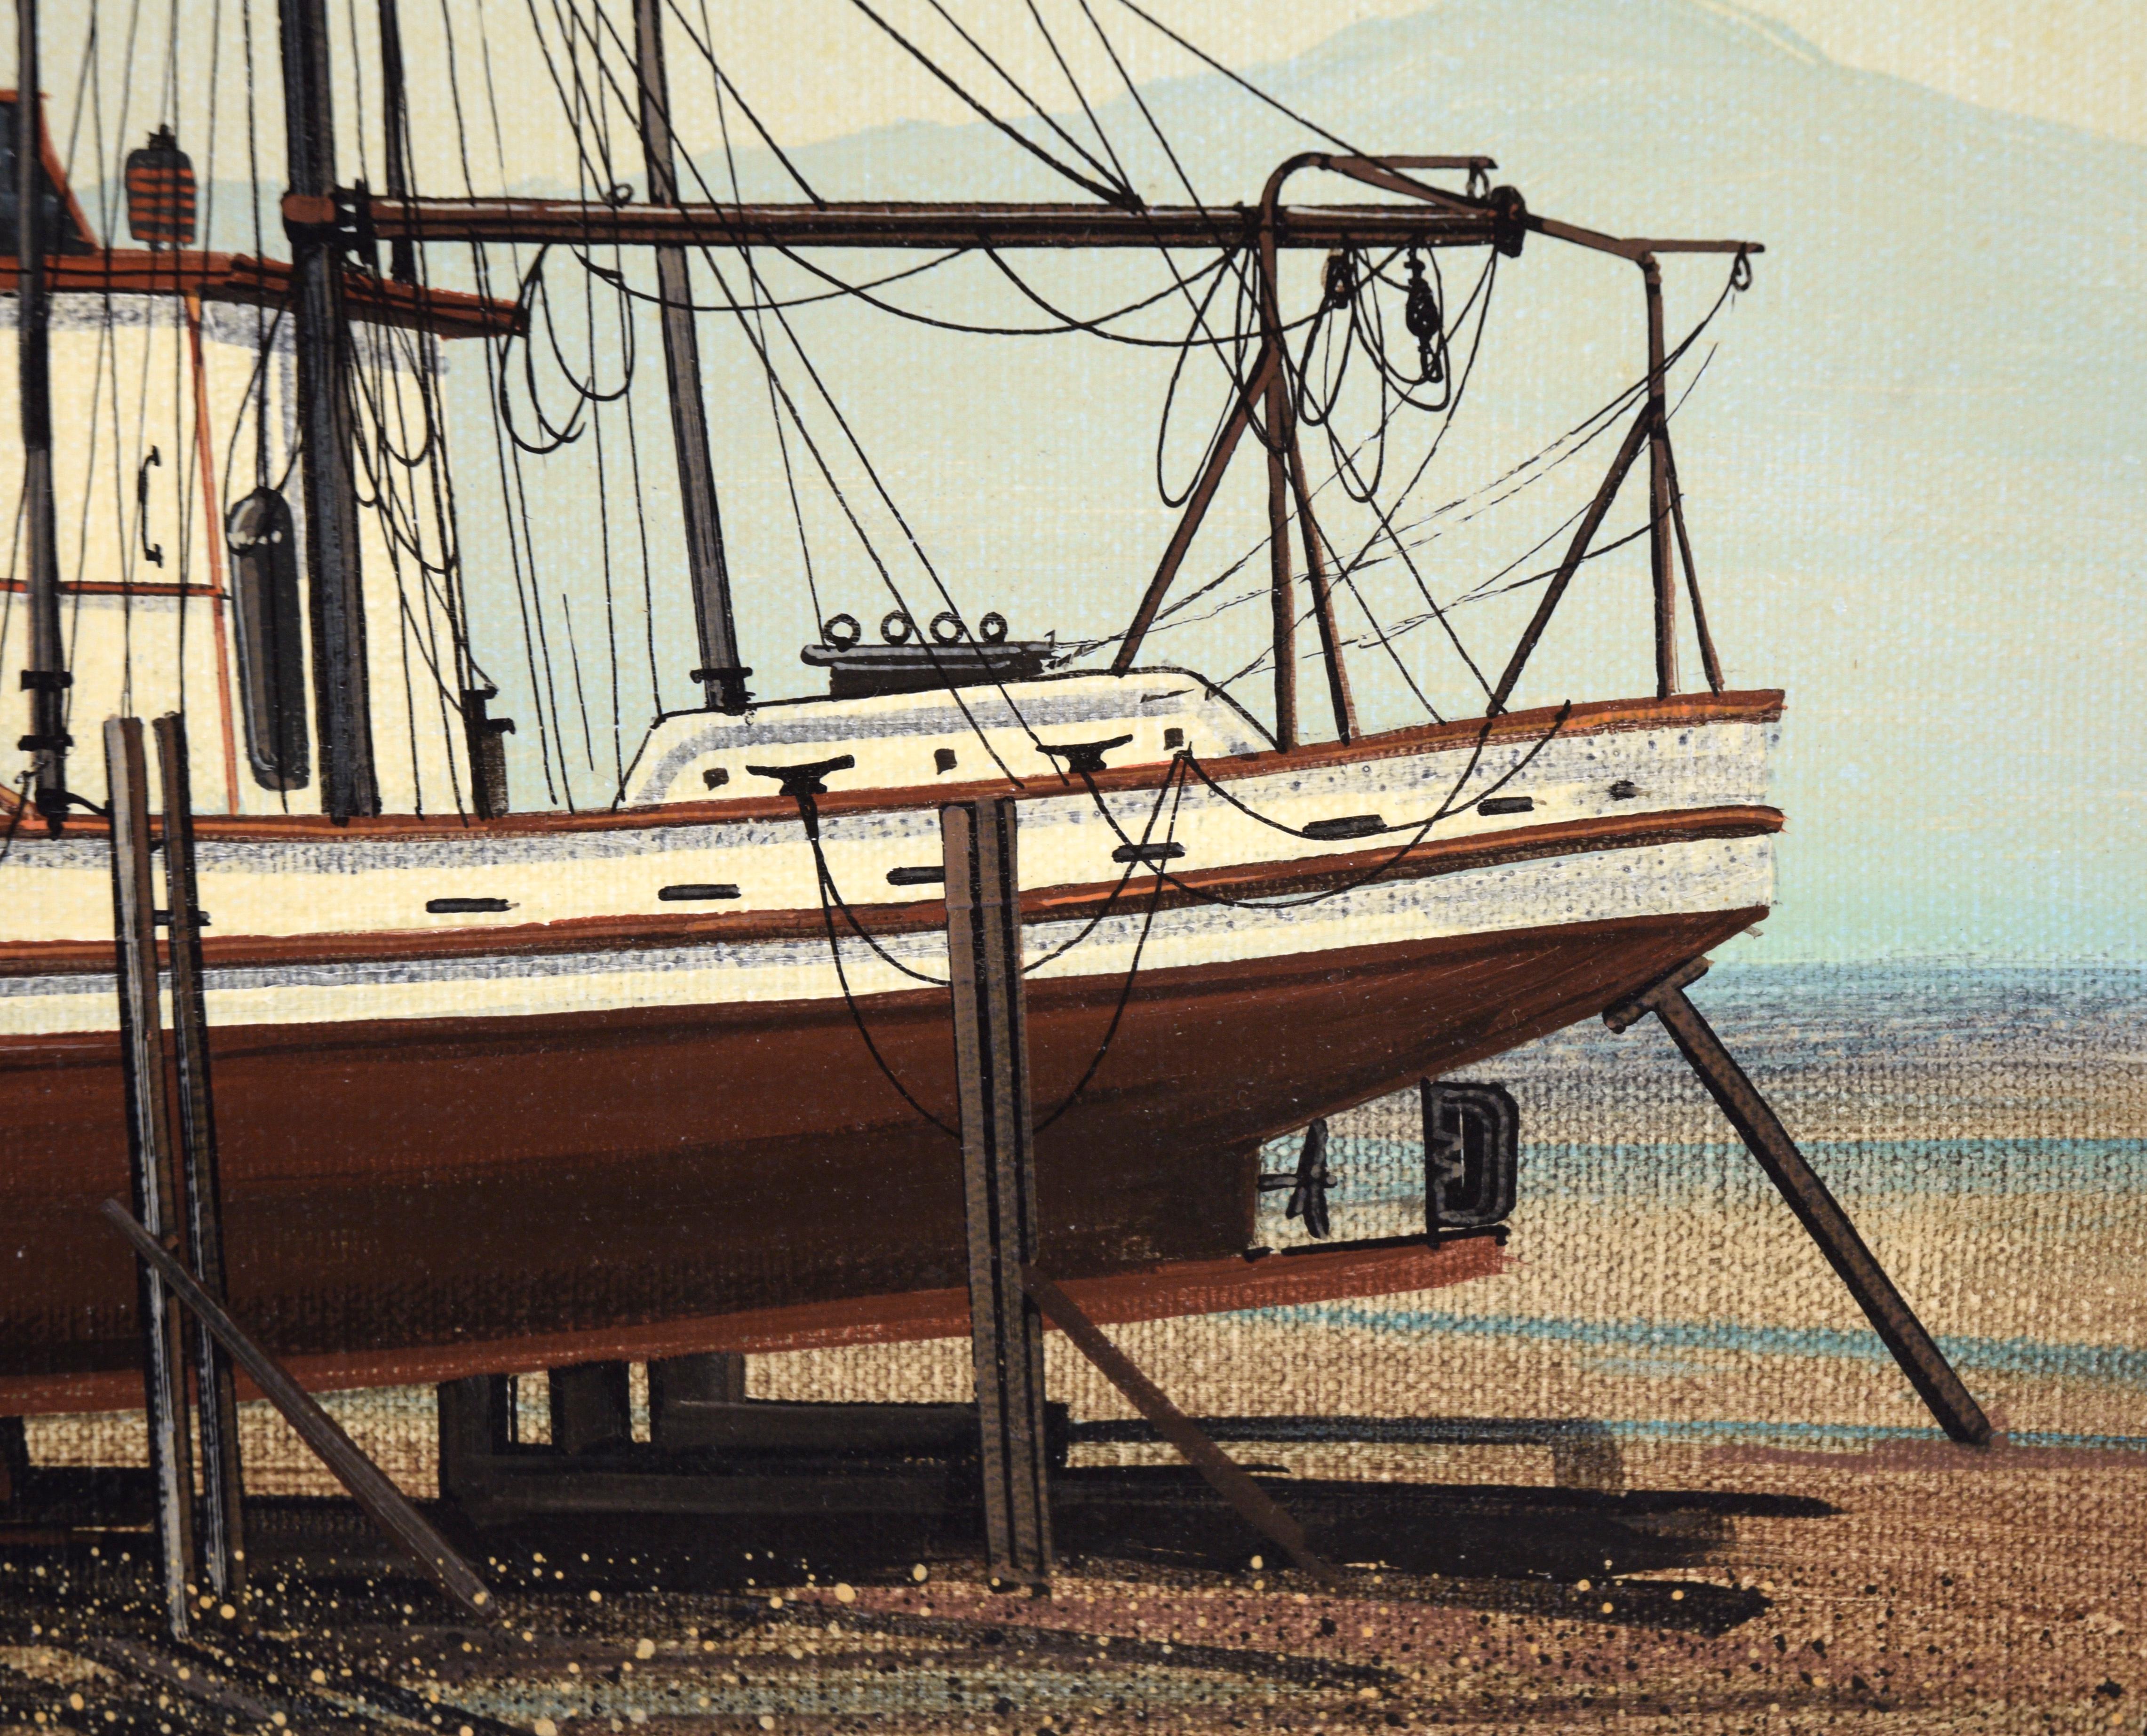 Fishing Boat in Dry Dock at the Shore - Oil on Canvas

Serene depiction of a fishing boat lifted up by Glenn Scott Kuhnly (American, 1939-2012). Complete with rigging, this piece is wonderfully detailed. At the edge of the water, the boat is lifted